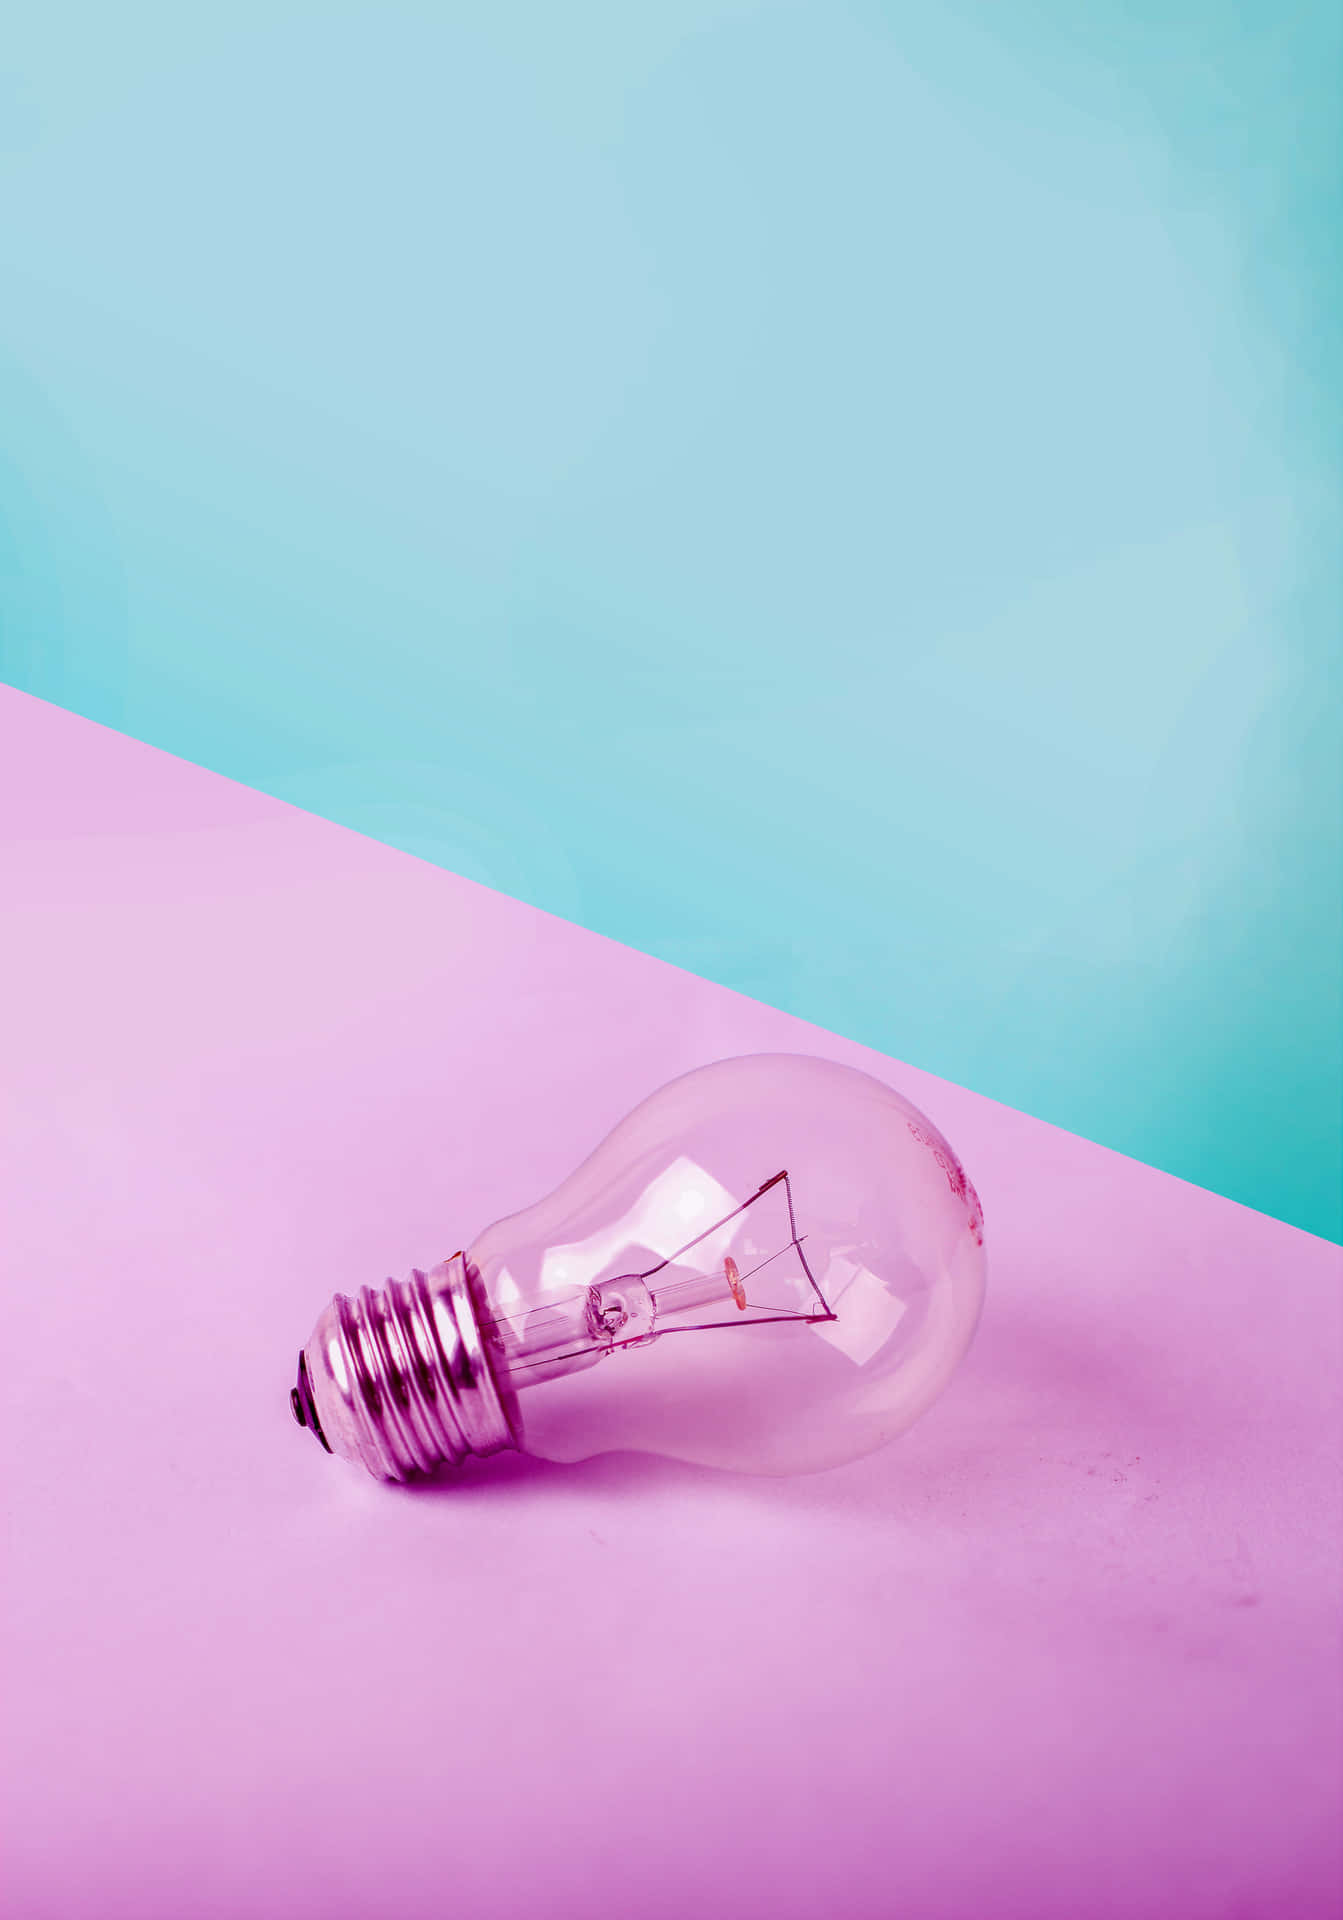 Incandescent Bulb On Pink Surface Wallpaper